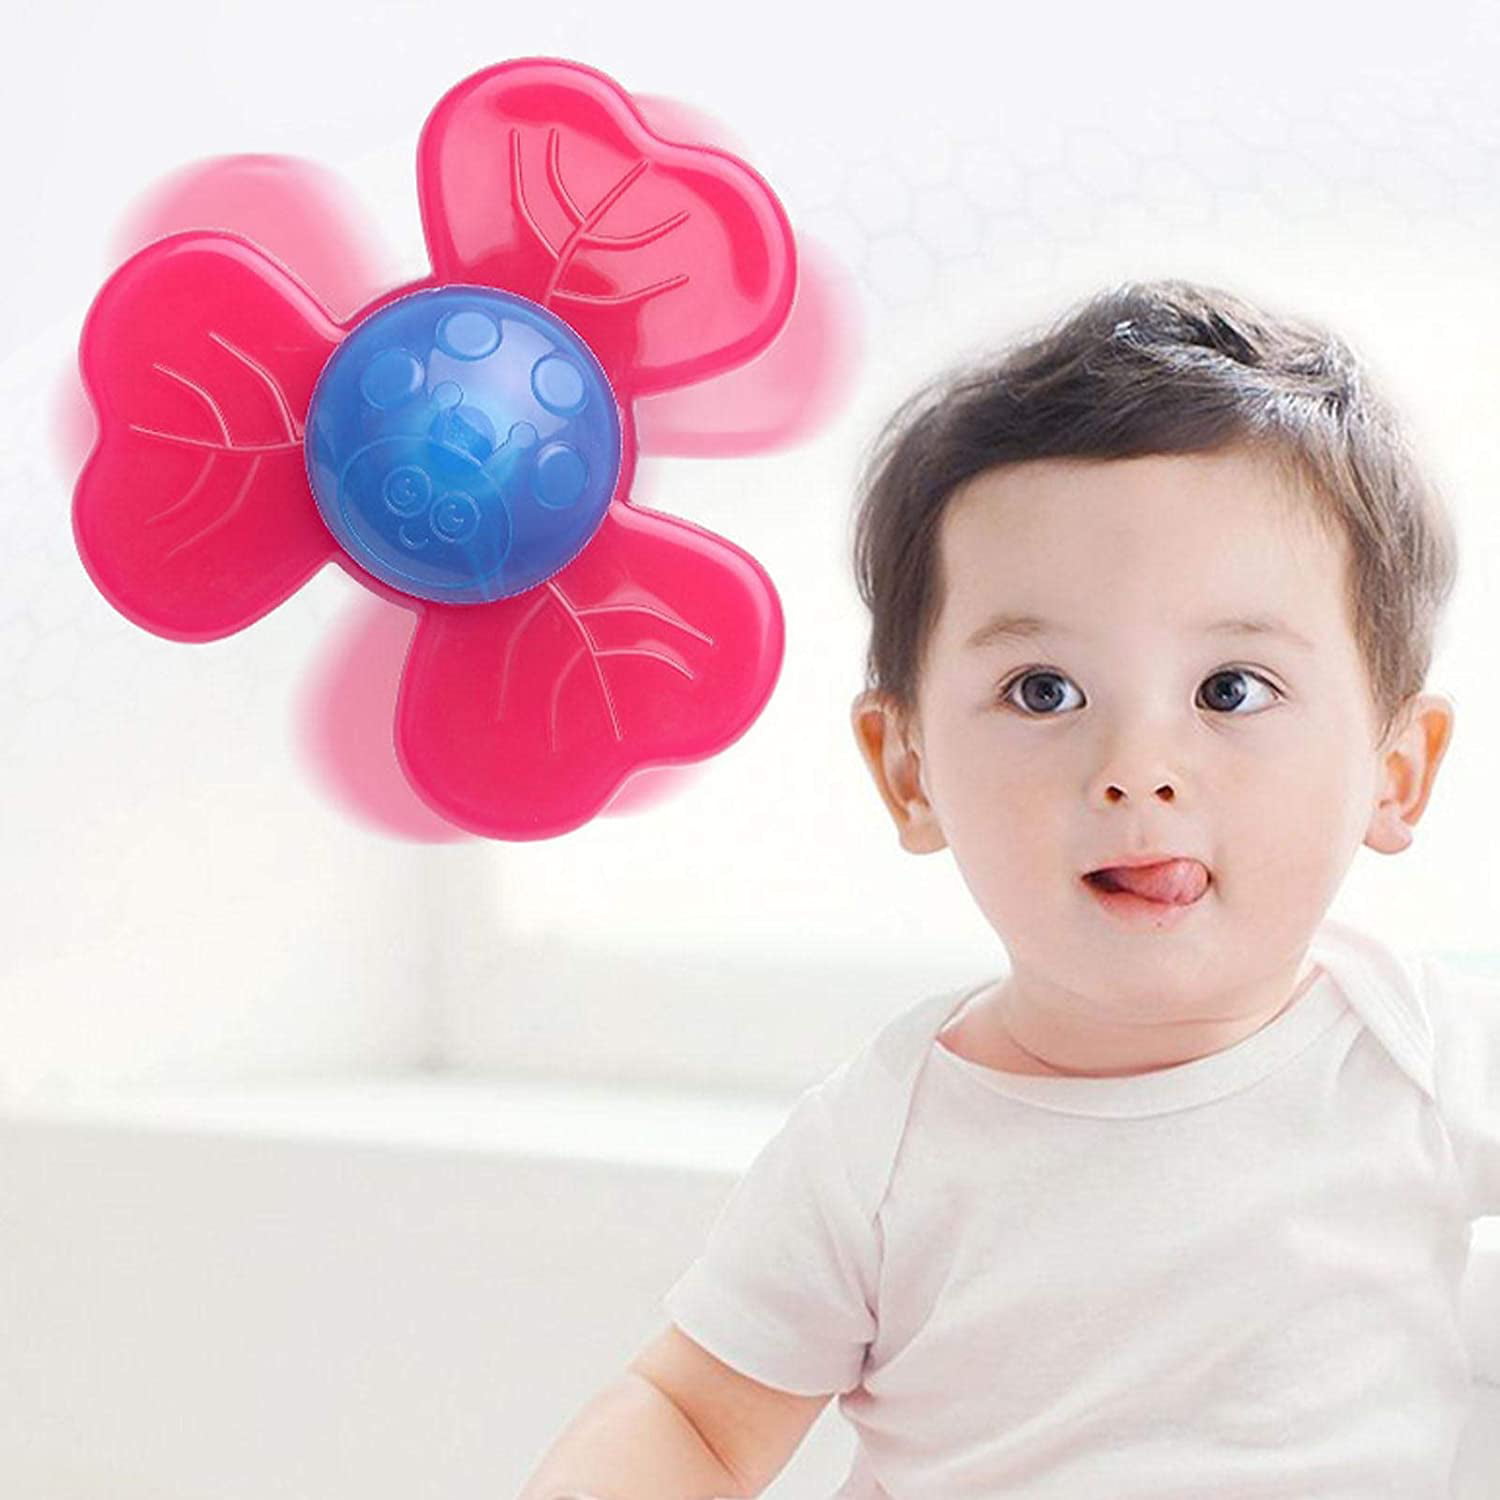 for Stress Relief Anti Anxiety Gifts for Kids Toddler-Style_B_3_Pcs Interesting Baby Roatation Toys 3pcs Spin Sucker Top Spinner Toy 